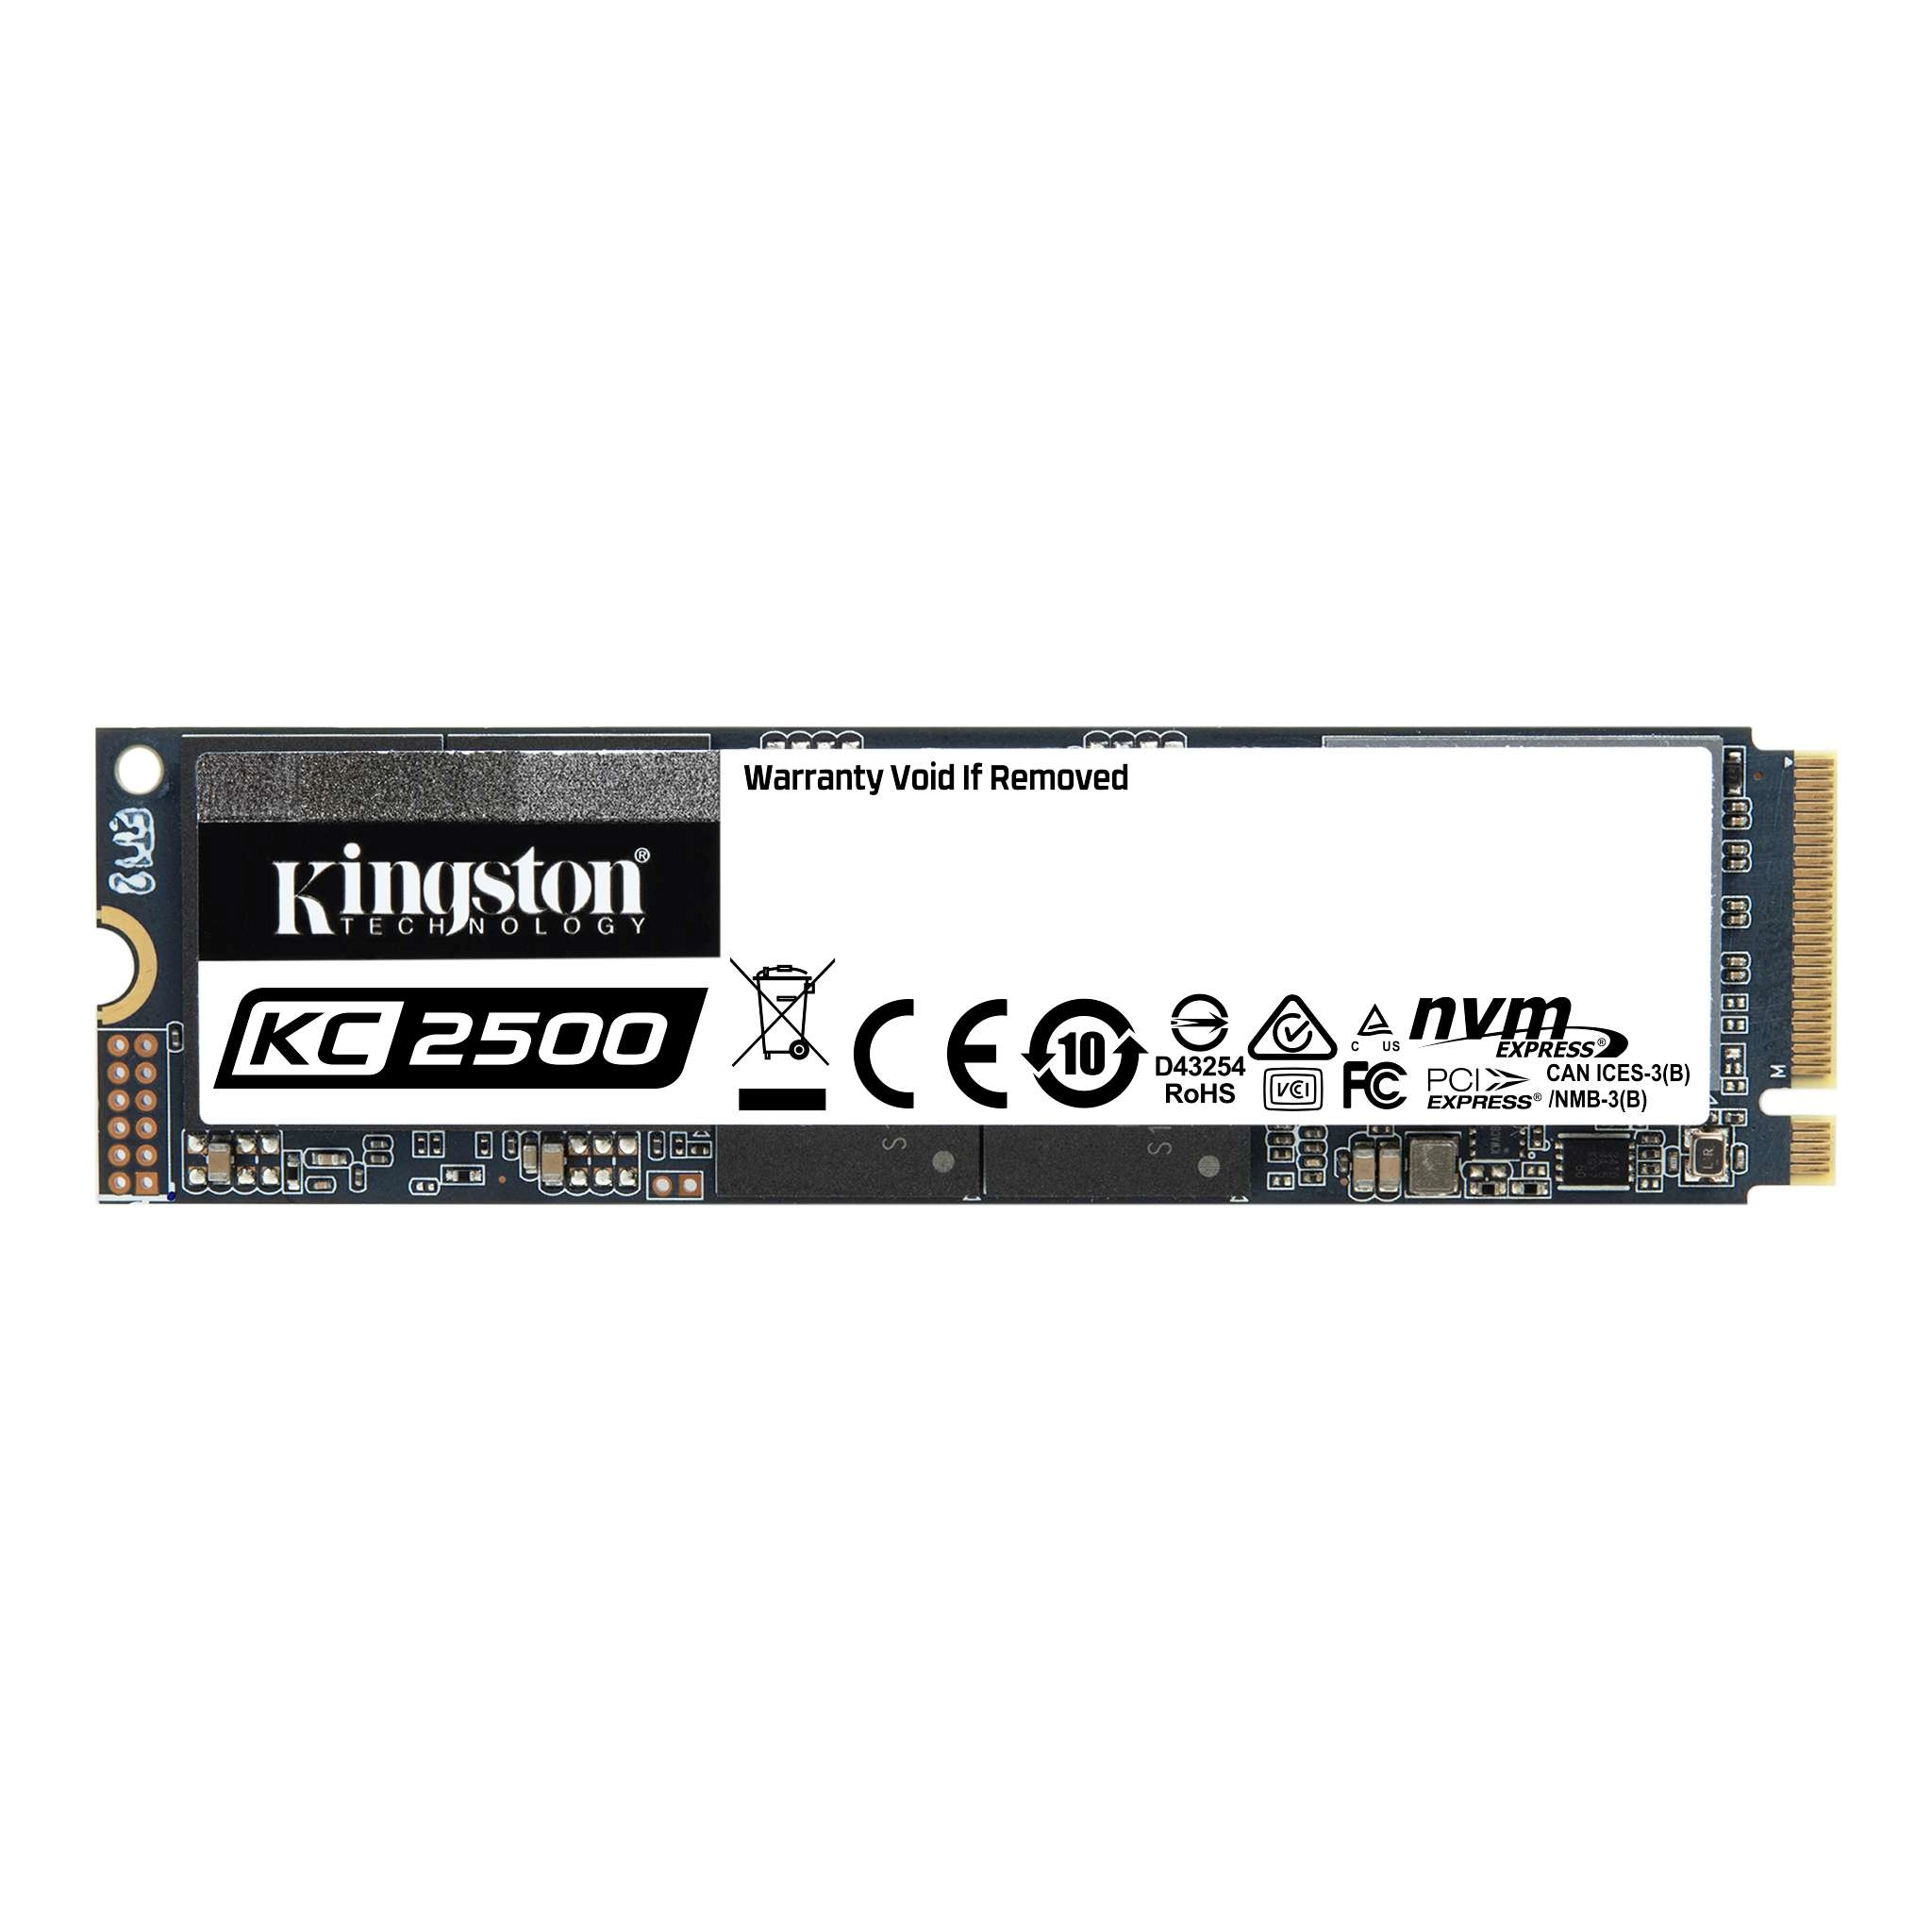 M.2 NVMe SSD 250GB Kingston KC2500, Interface: PCIe3.0 x4 / NVMe1.3, M2 Type 2280 form factor, Sequential Reads 3500 MB/s, Sequential Writes 1200 MB/s, Max Random 4k Read 375,000 / Write 300,000 IOPS, SMI 2262EN controller, 96-layer 3D NAND TLC